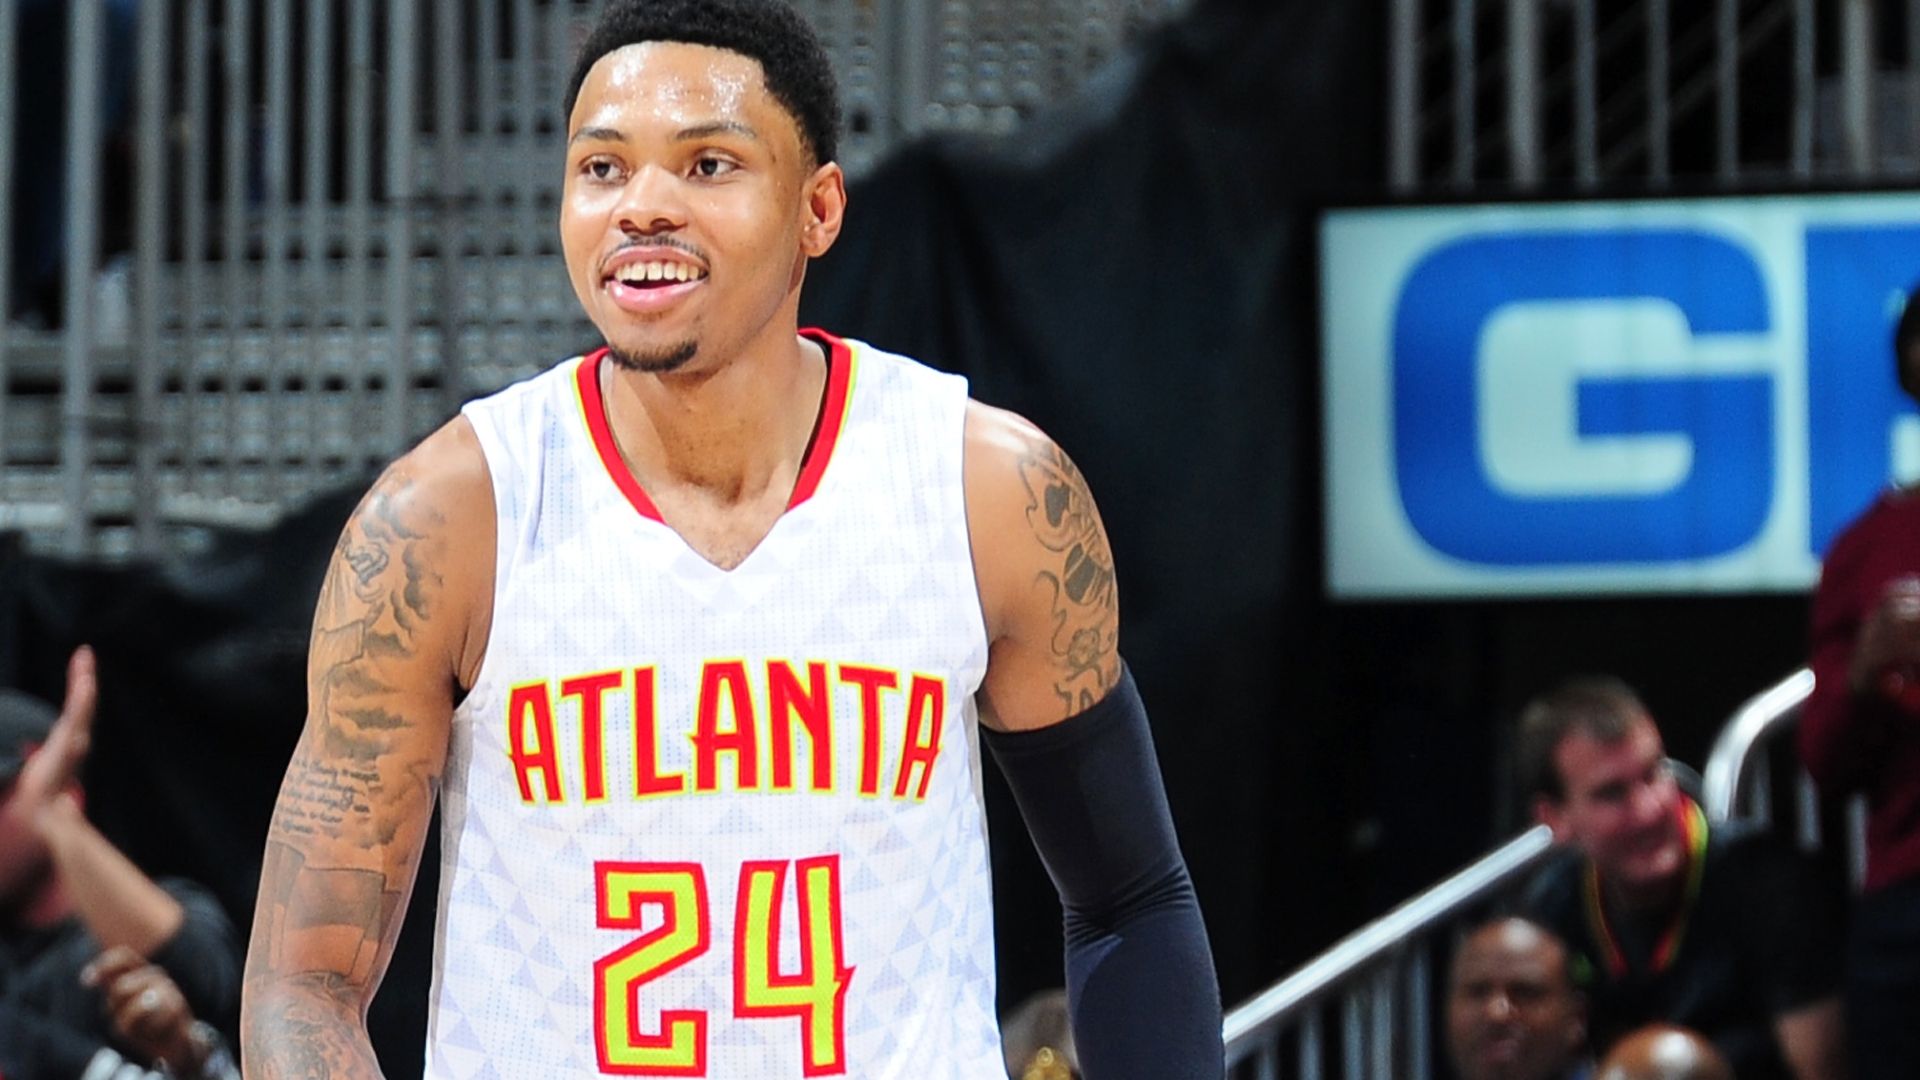 B/R Kicks on X: Kent Bazemore agrees to five-year shoe extension with  Under Armour, per @NickDePaula  / X